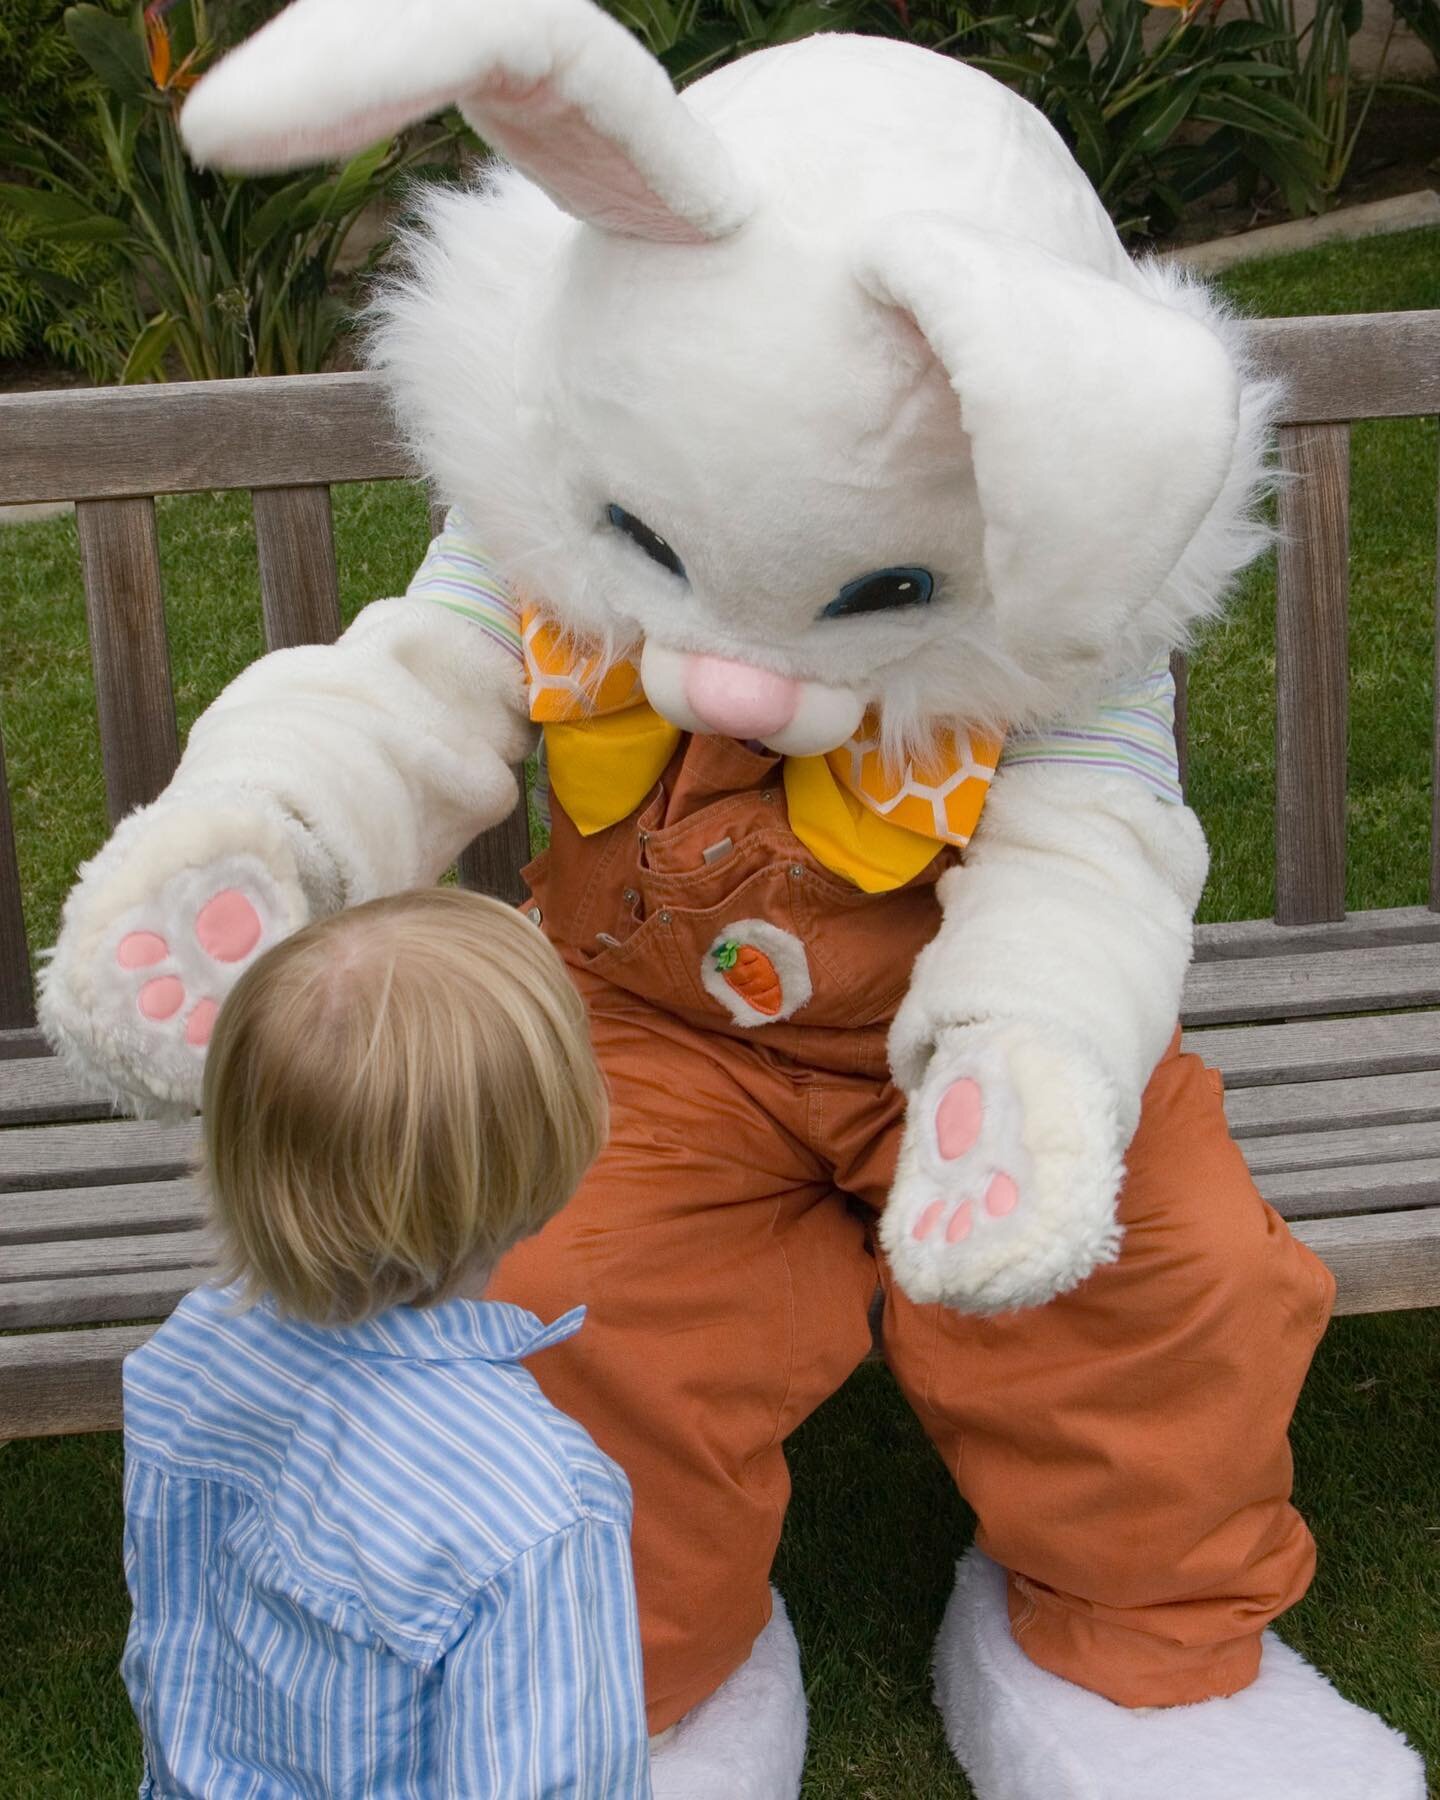 Bring the whole family and join us Saturday, April 16 for an Easter celebration at Fareground.
We&rsquo;ll have a children's Easter egg hunt, brunch specials, live music, and fun treats for all ages like cotton candy and popcorn.
Be sure to keep your